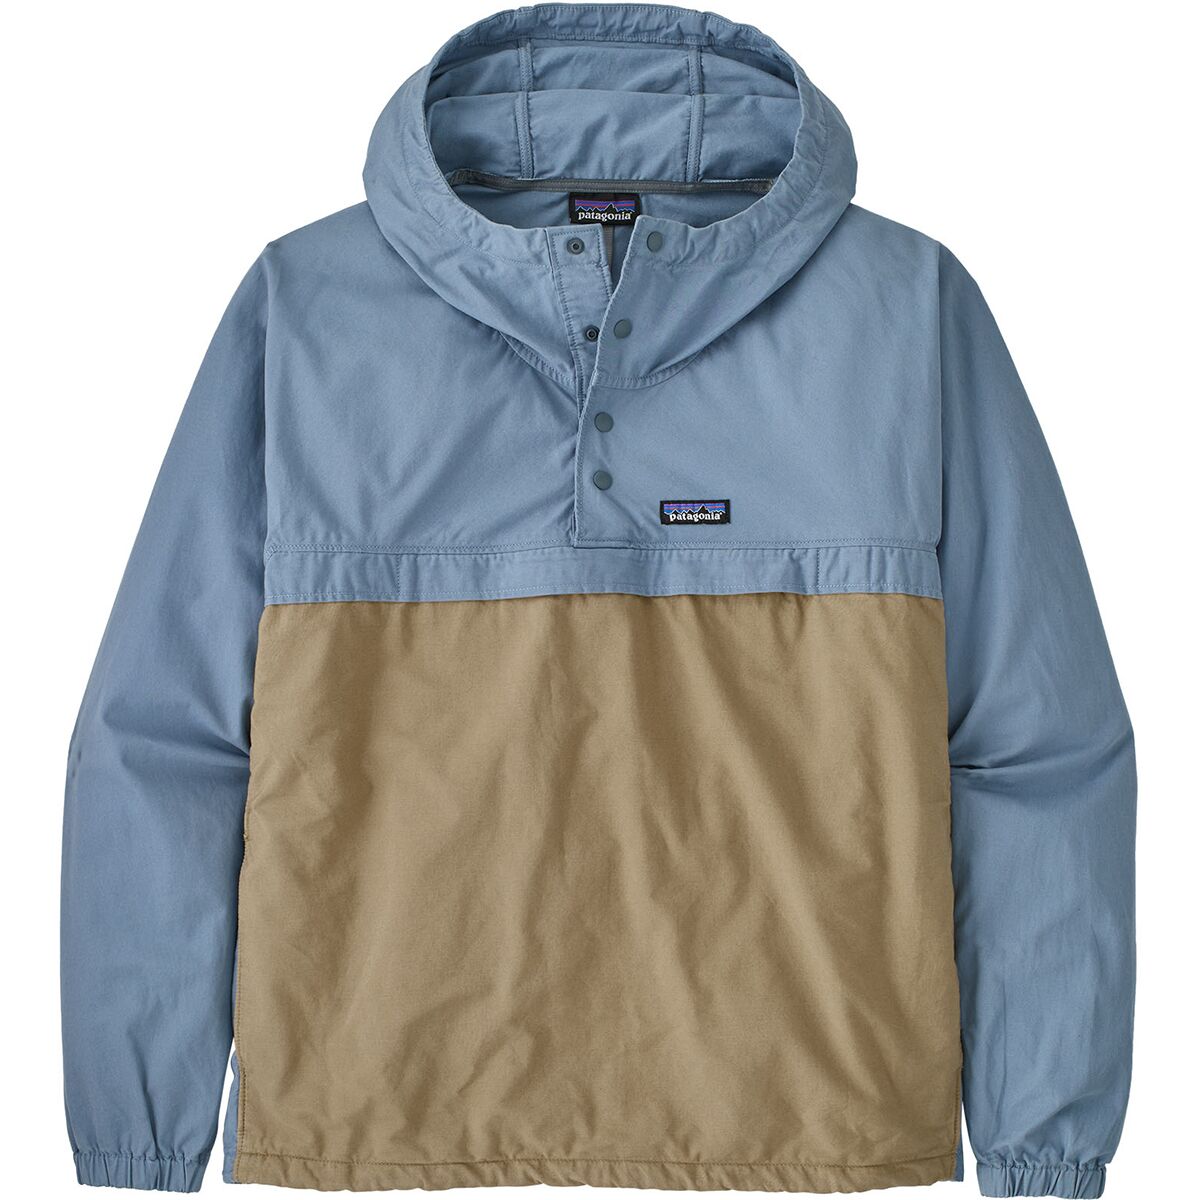 Funhoggers Anorak - Men's by Patagonia | US-Parks.com